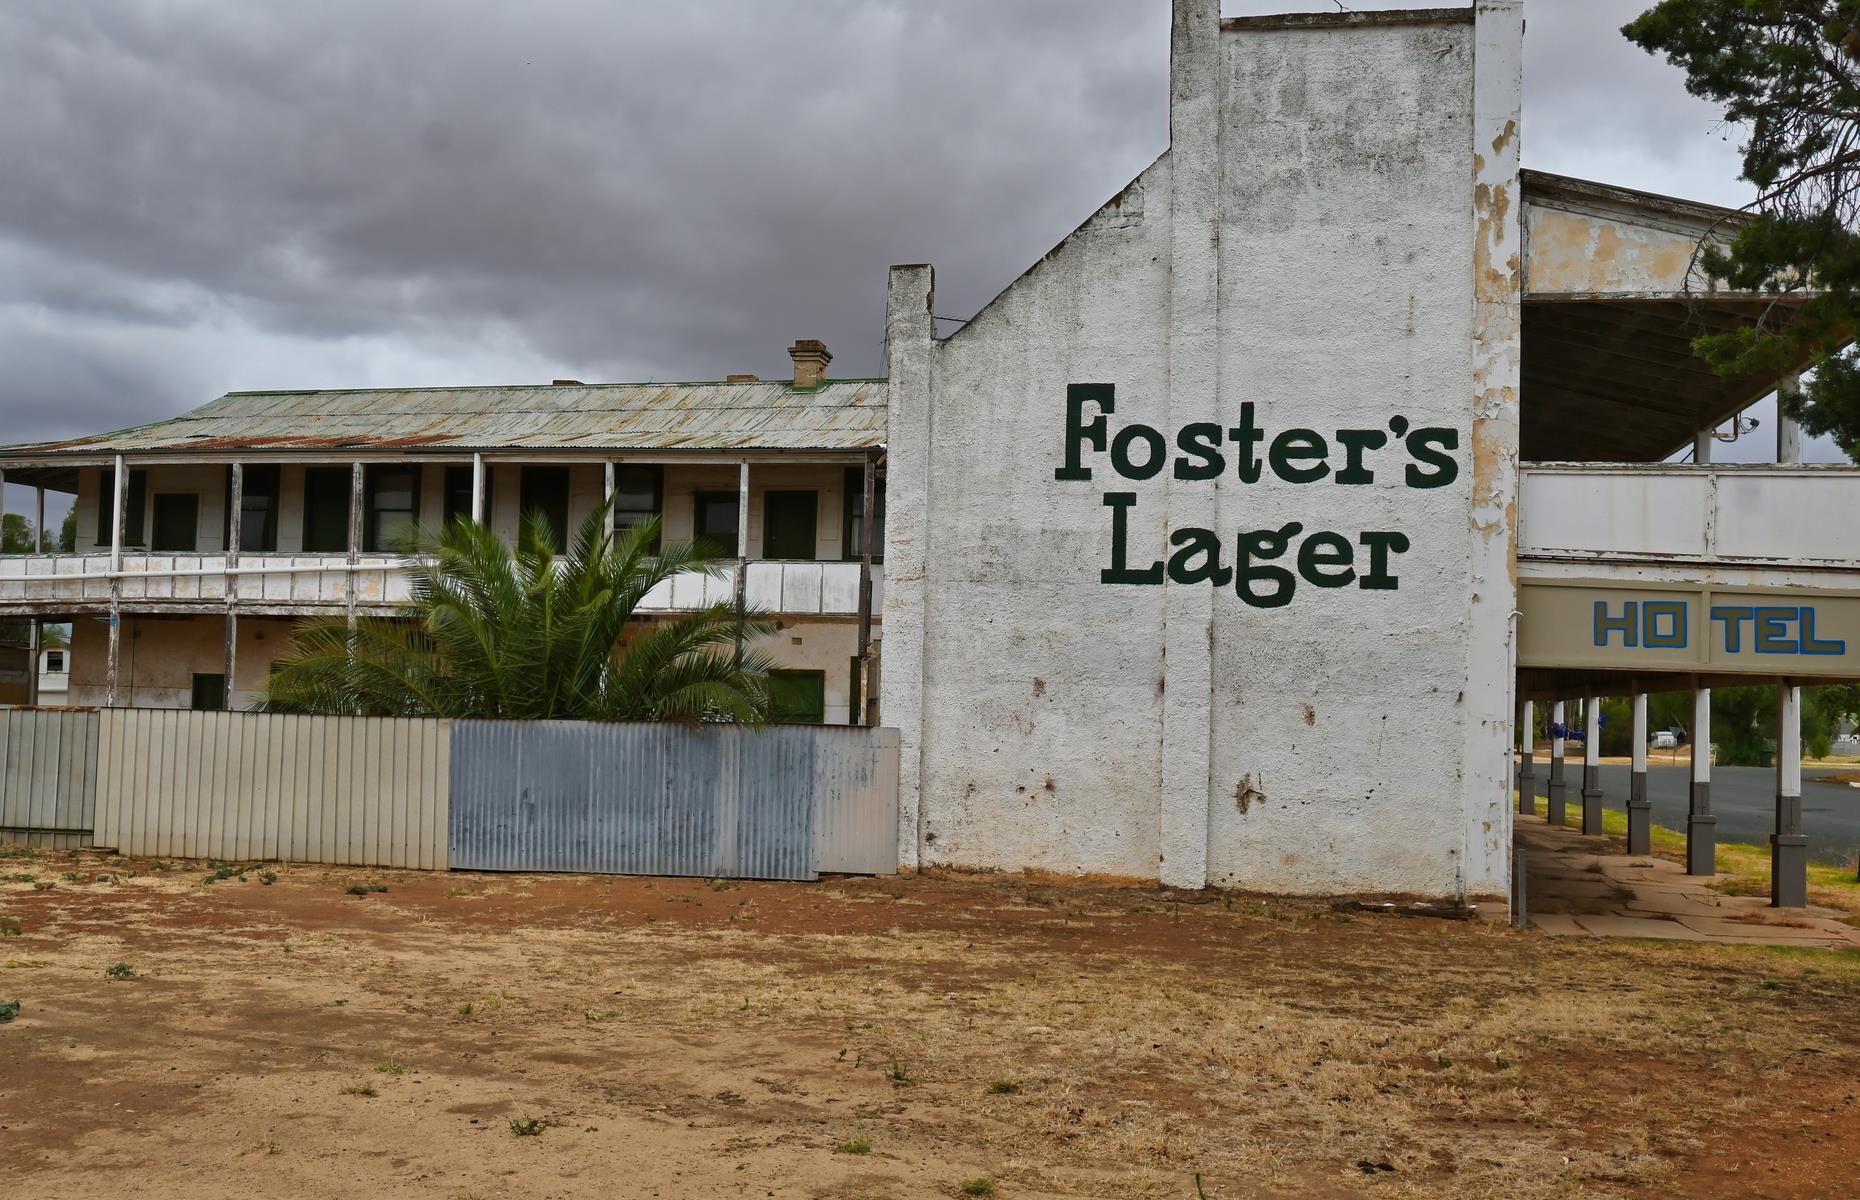 <p>Australia’s country towns are dotted with old pubs where a cold beer, hot pie and yarn await thirsty travelers. Sadly though the taps have long dried up at Urana’s Royal George Hotel. The typical Aussie hostelry, with its corrugated tin roof and verandas, opened in 1926, but closed in 1998. It’s been left to deteriorate since then with sections of it partly demolished.</p>